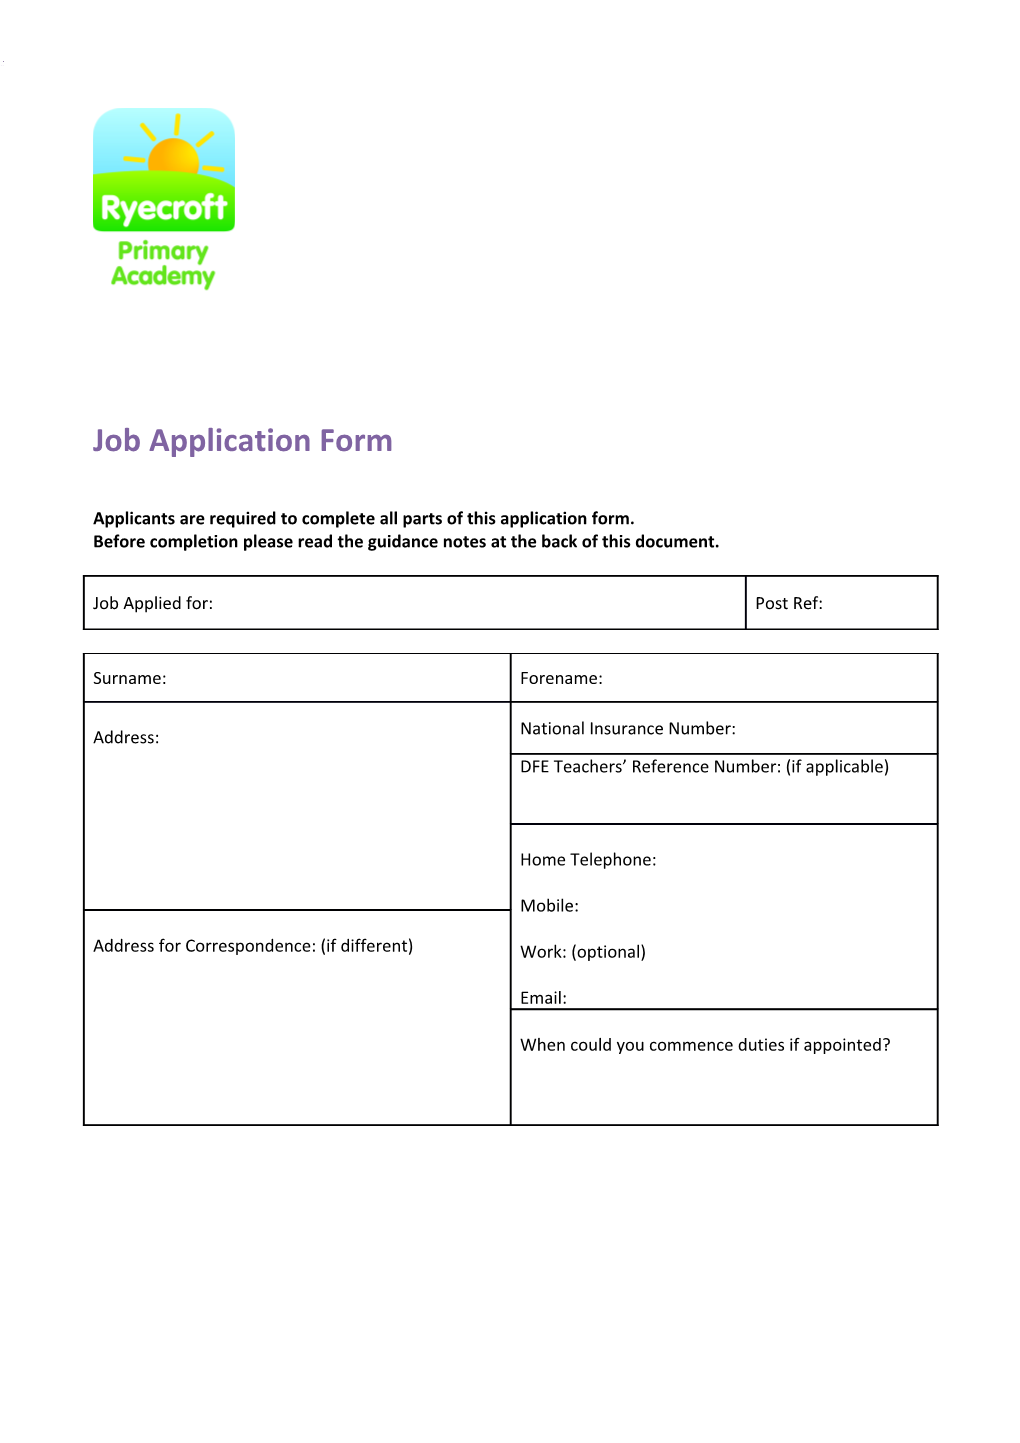 Applicants Are Required to Complete All Parts of This Application Form